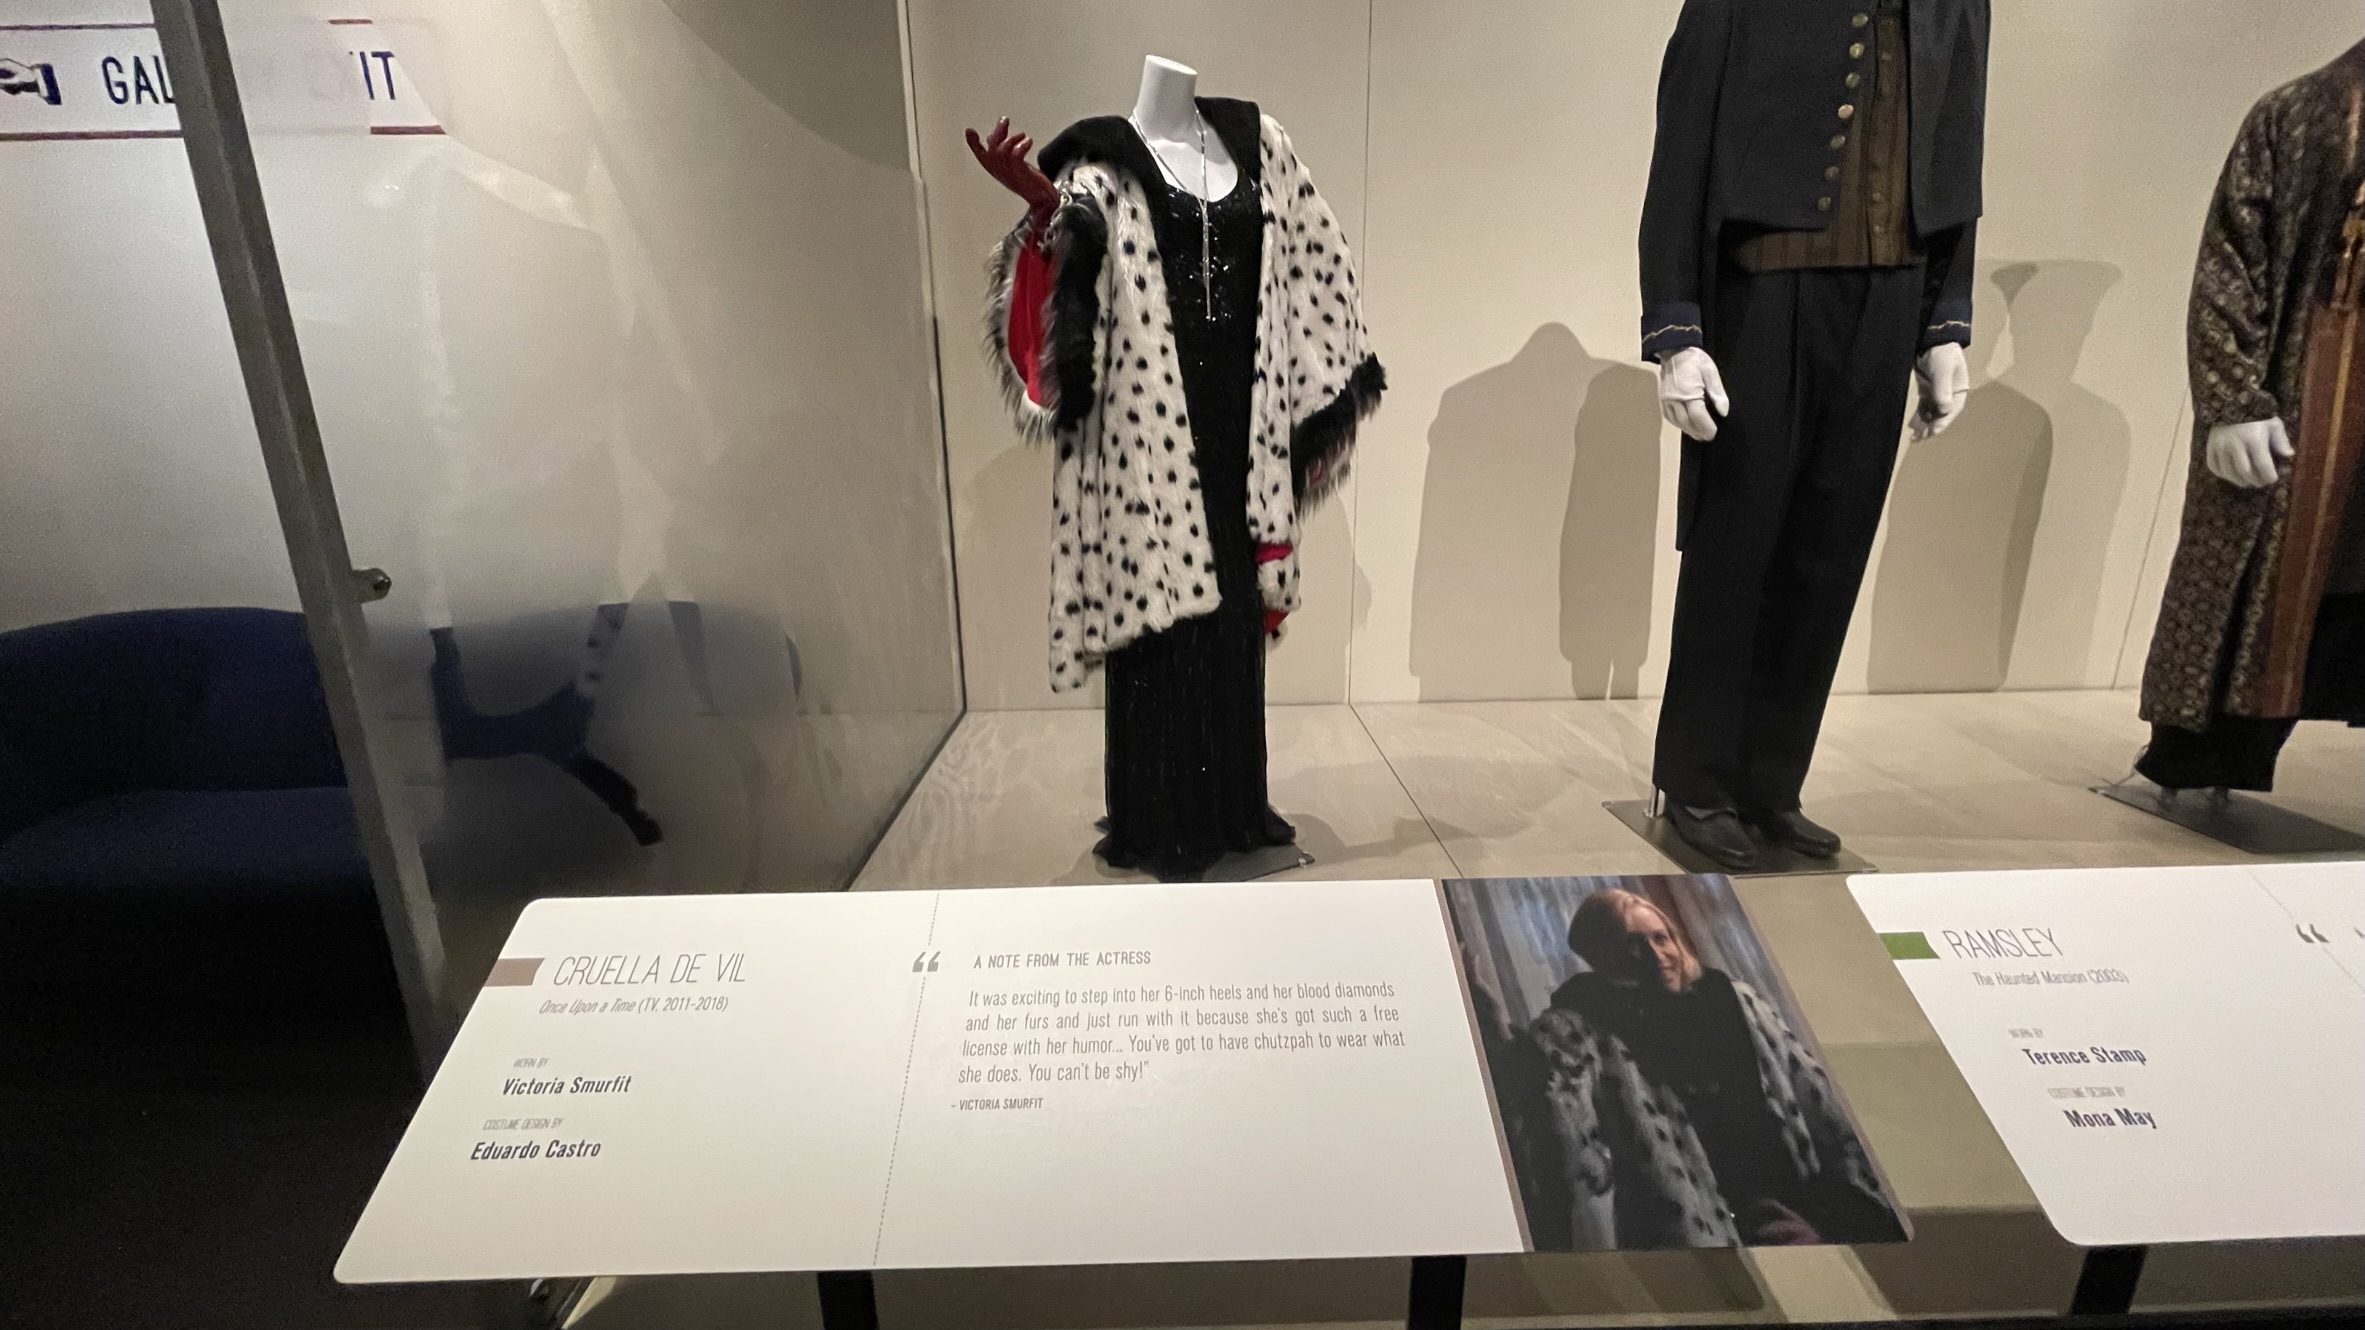 Disney Archives Disney Heroes & Villains: The Art of the Disney Costume Cruella DeVil from Once Upon a Time